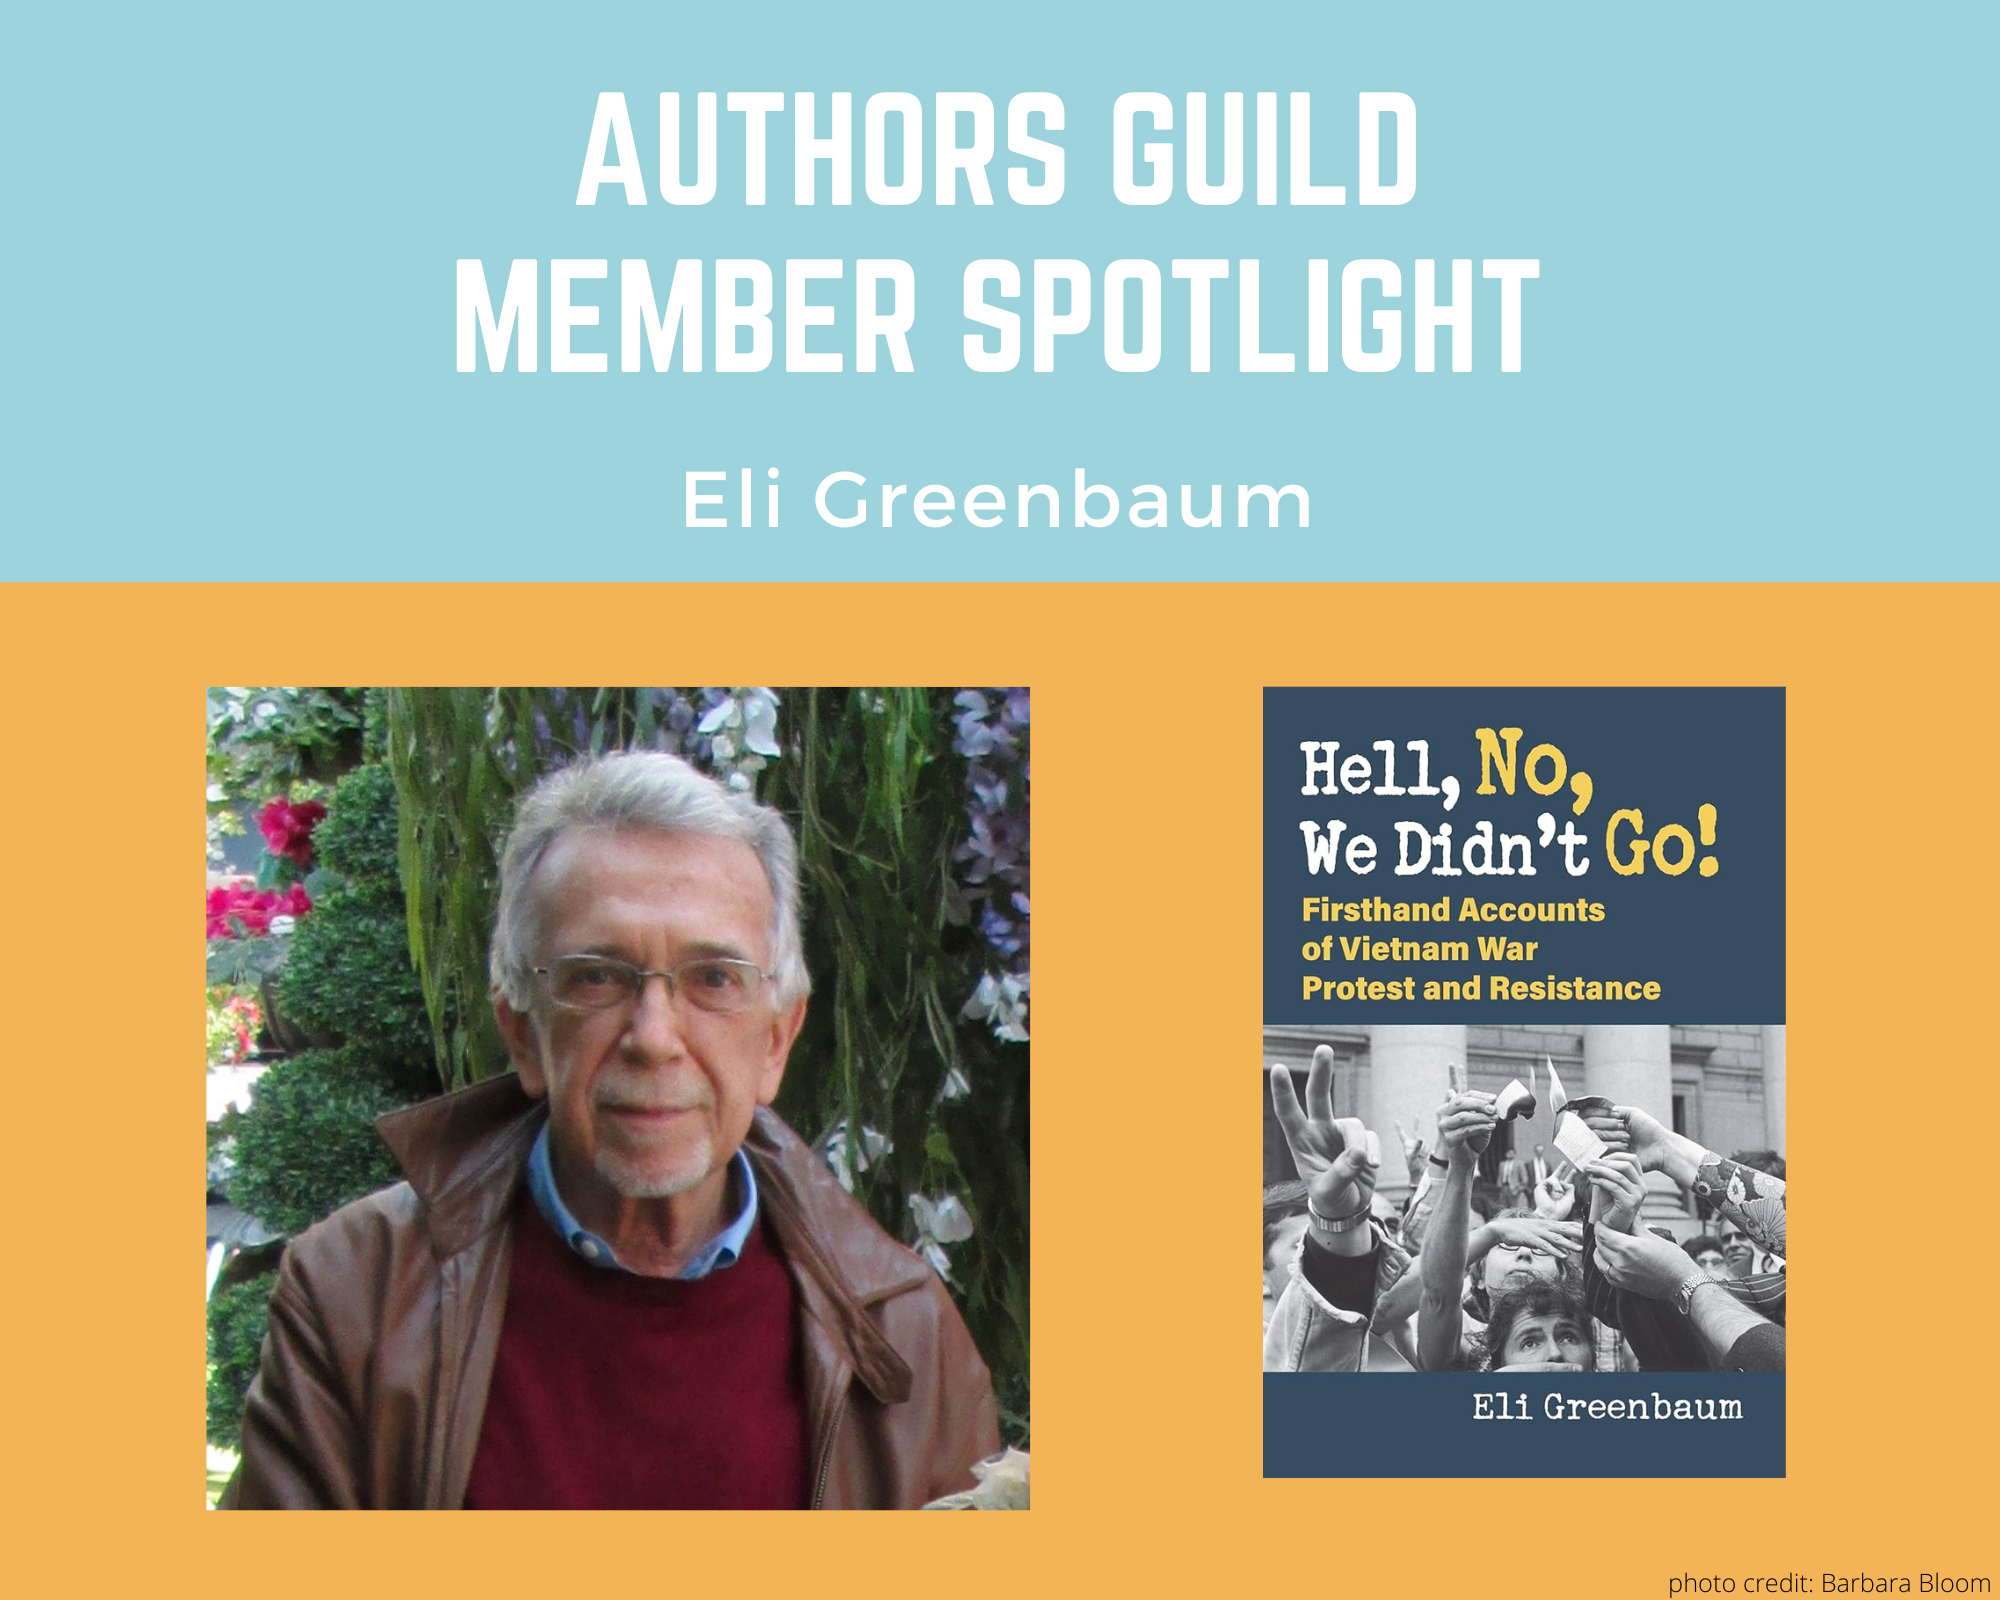 author Eli Greenbaum and an image of his book Hell, No, We Didn't Go